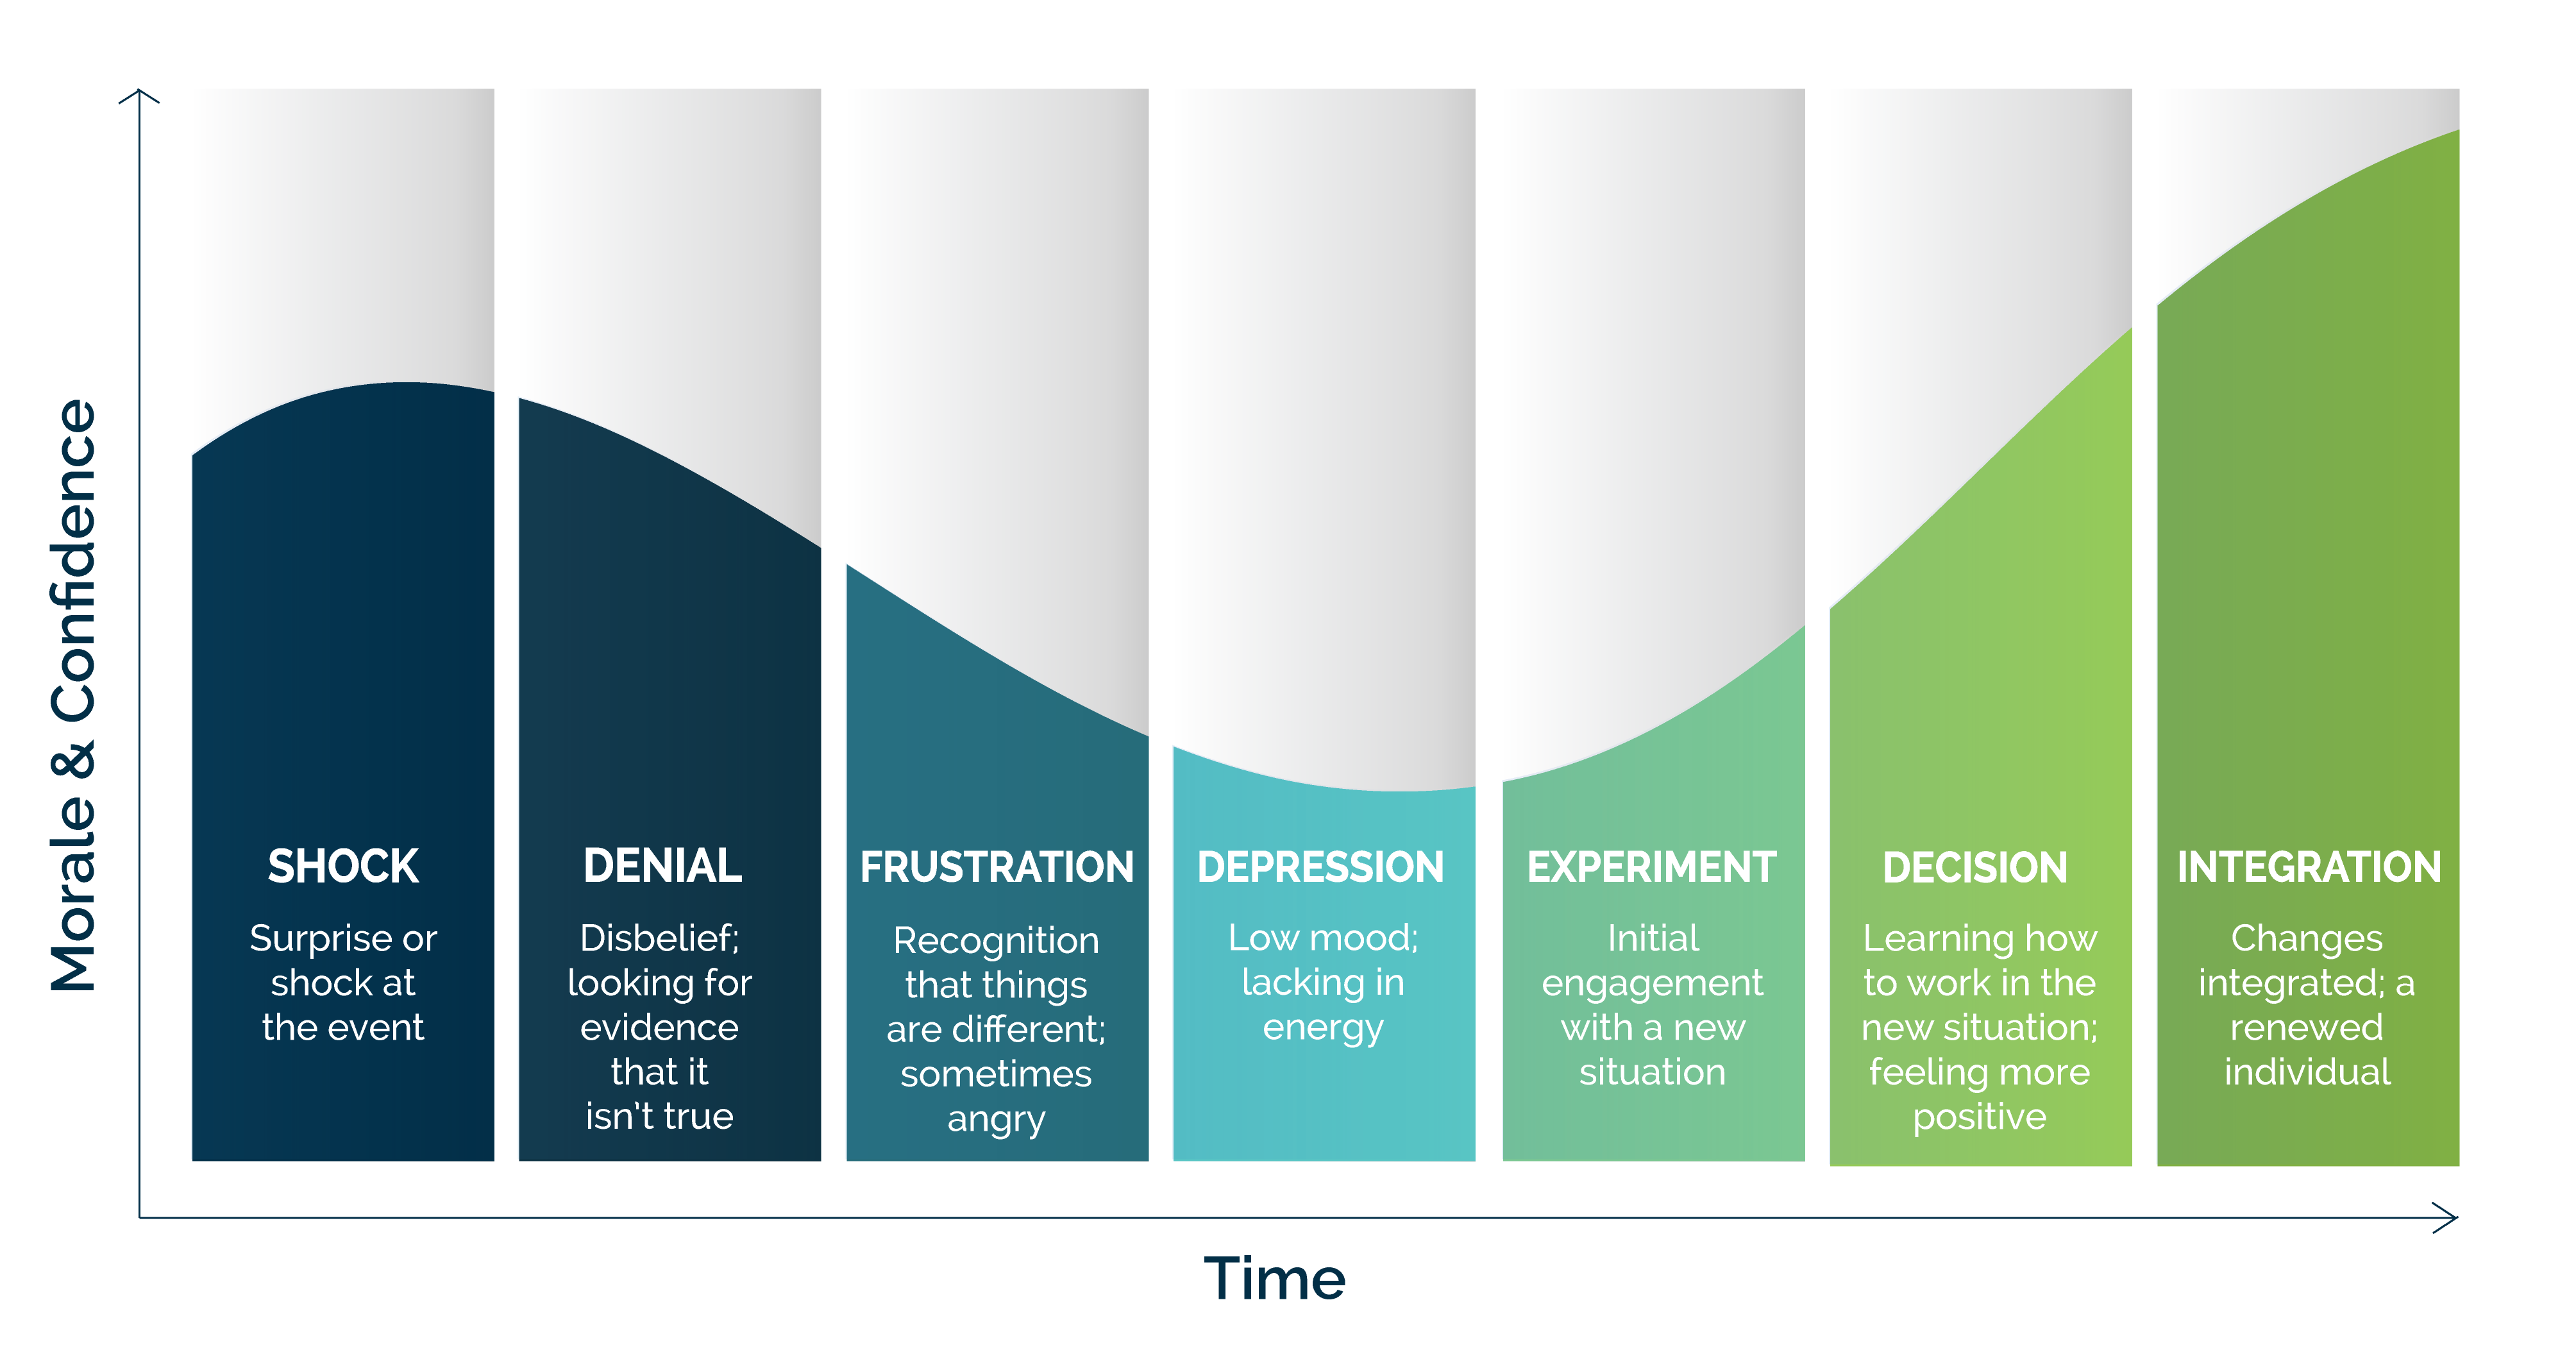 Stages of grief and change -- graphic